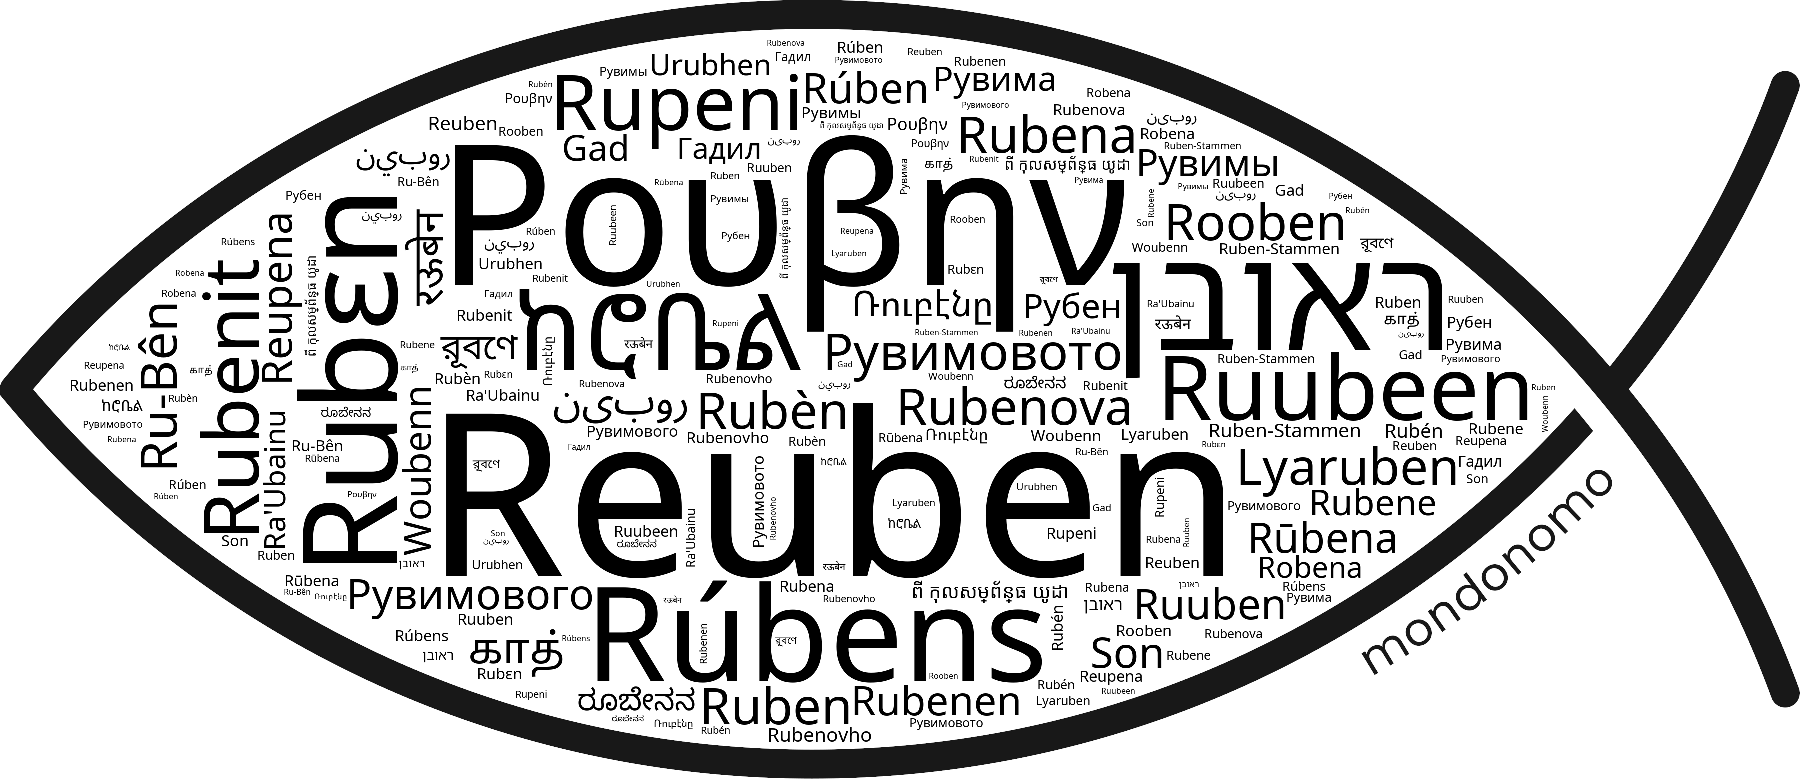 Name Reuben in the world's Bibles